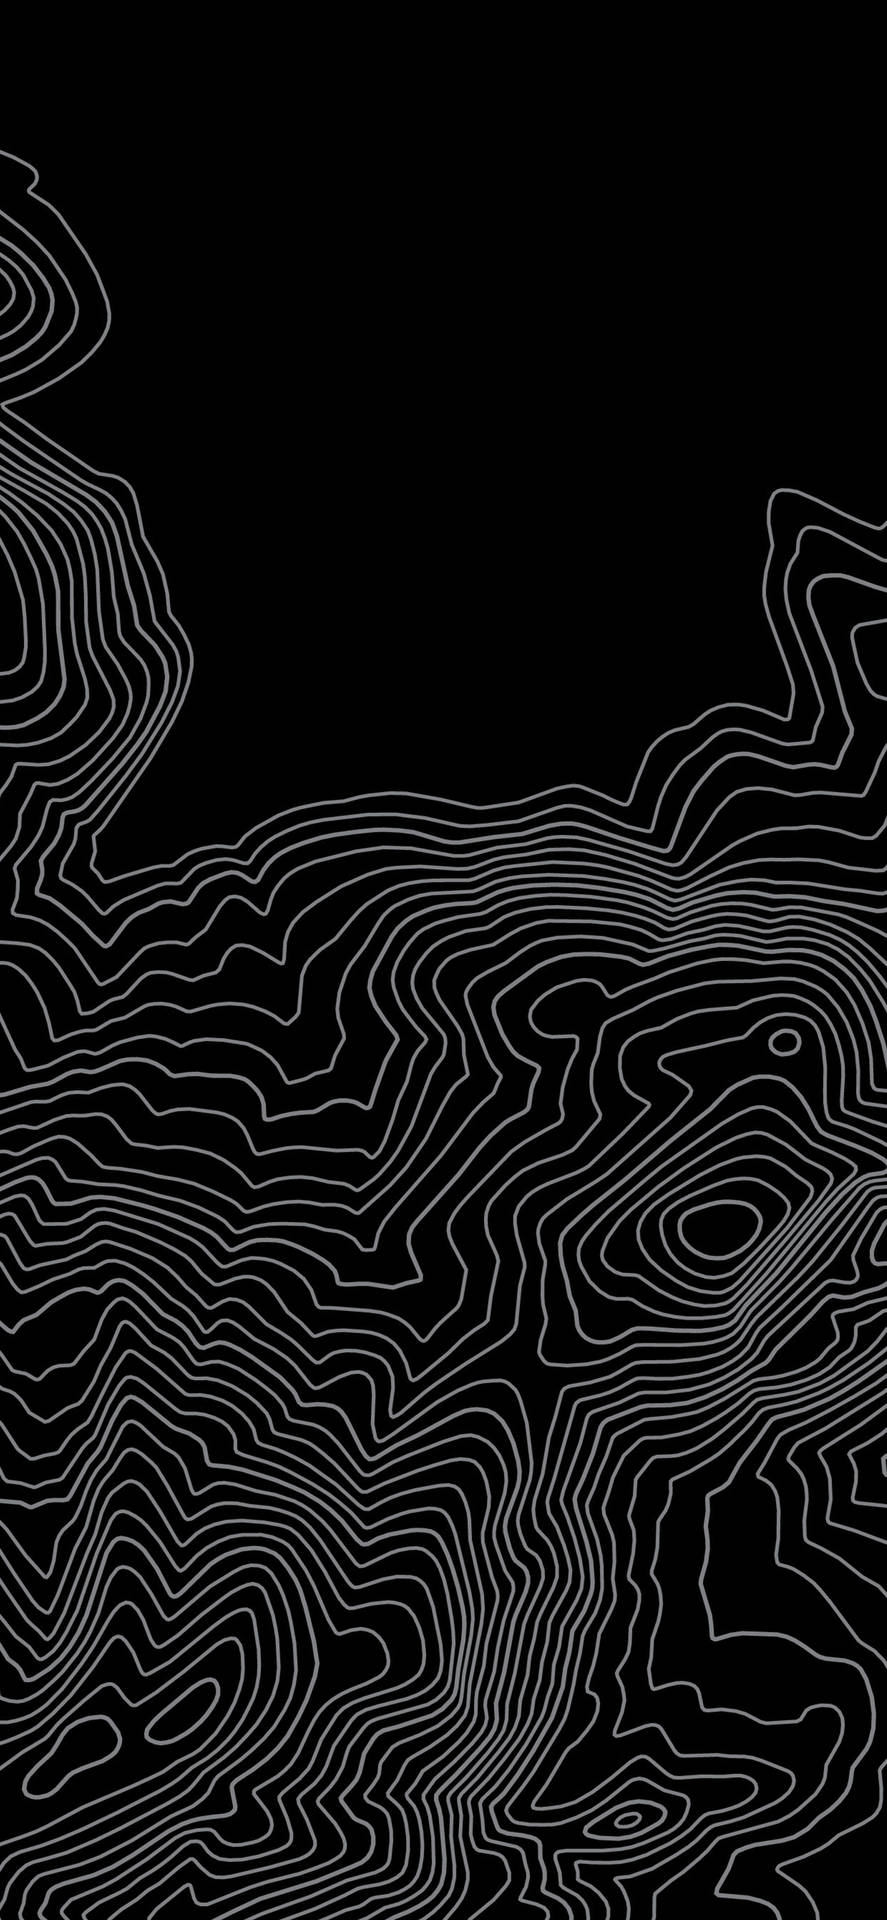 Abstract Design Of Black Leather iPhone Wallpaper